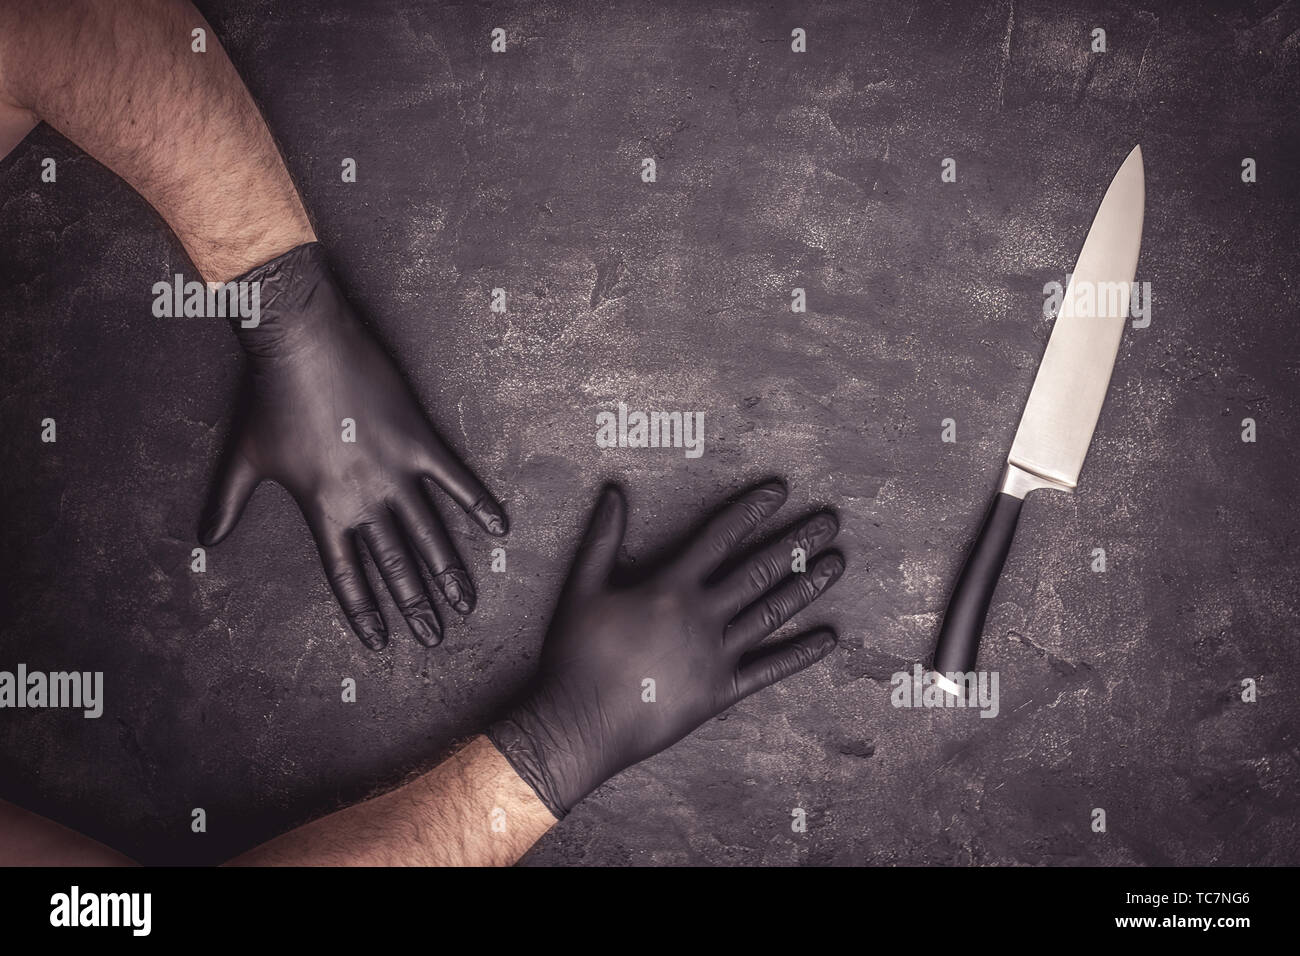 Big Knife and Male Hands with Black Latex Gloves on Dark Background Stock Photo